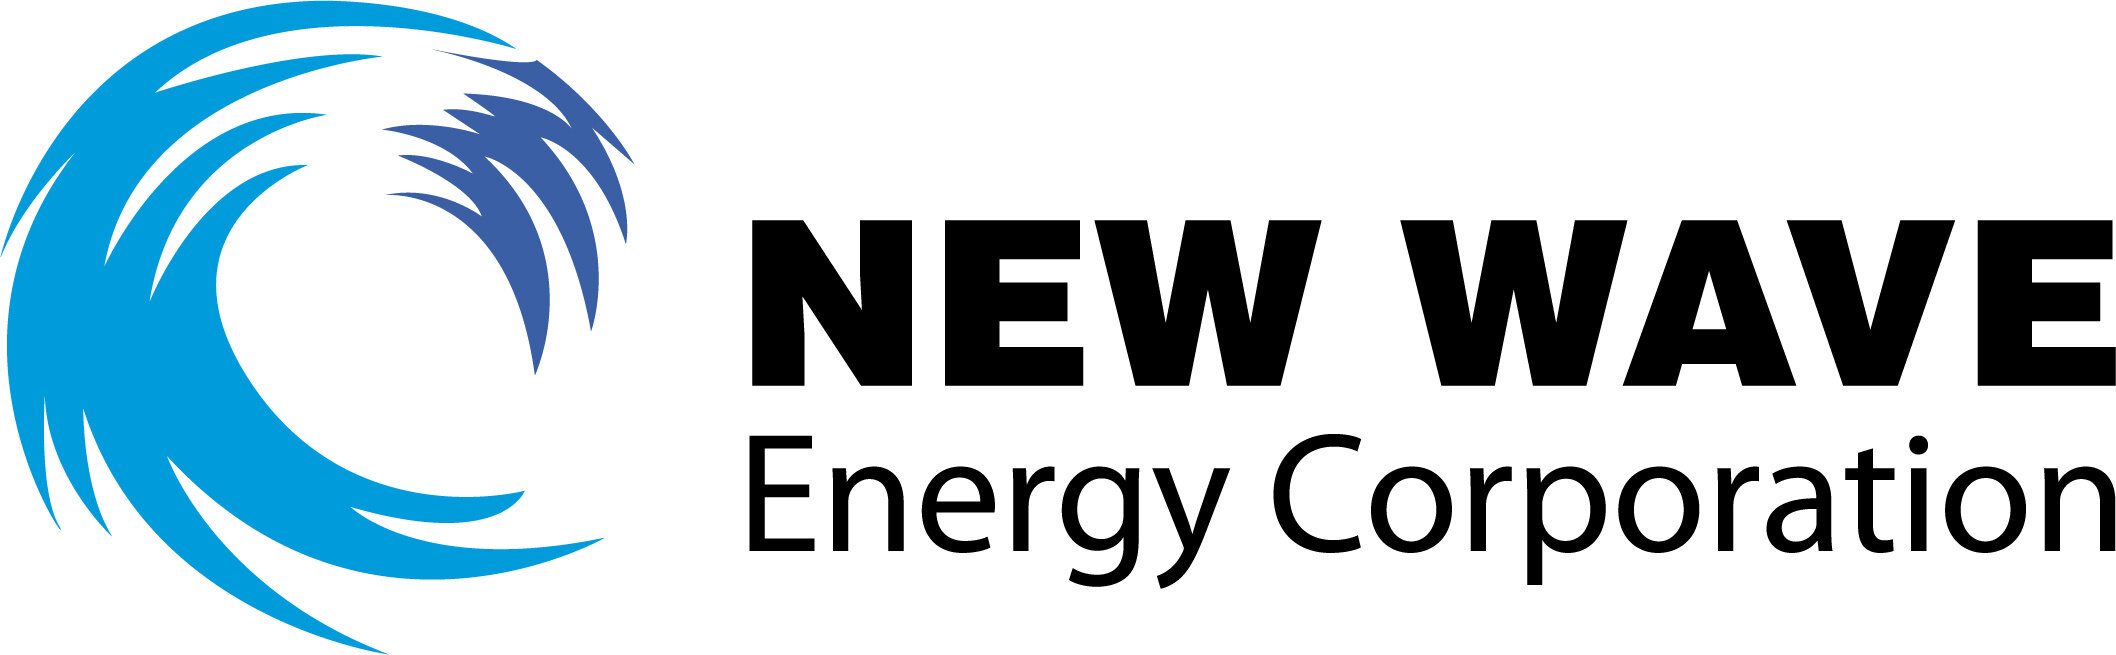 New Wave Energy, Electricity & Natural Gas, Compare Energy Rates, Quick  & Easy Enrollment, Alternative Energy Supplier, Discount Energy Supply, ESCO, Headquartered In Buffalo, NY